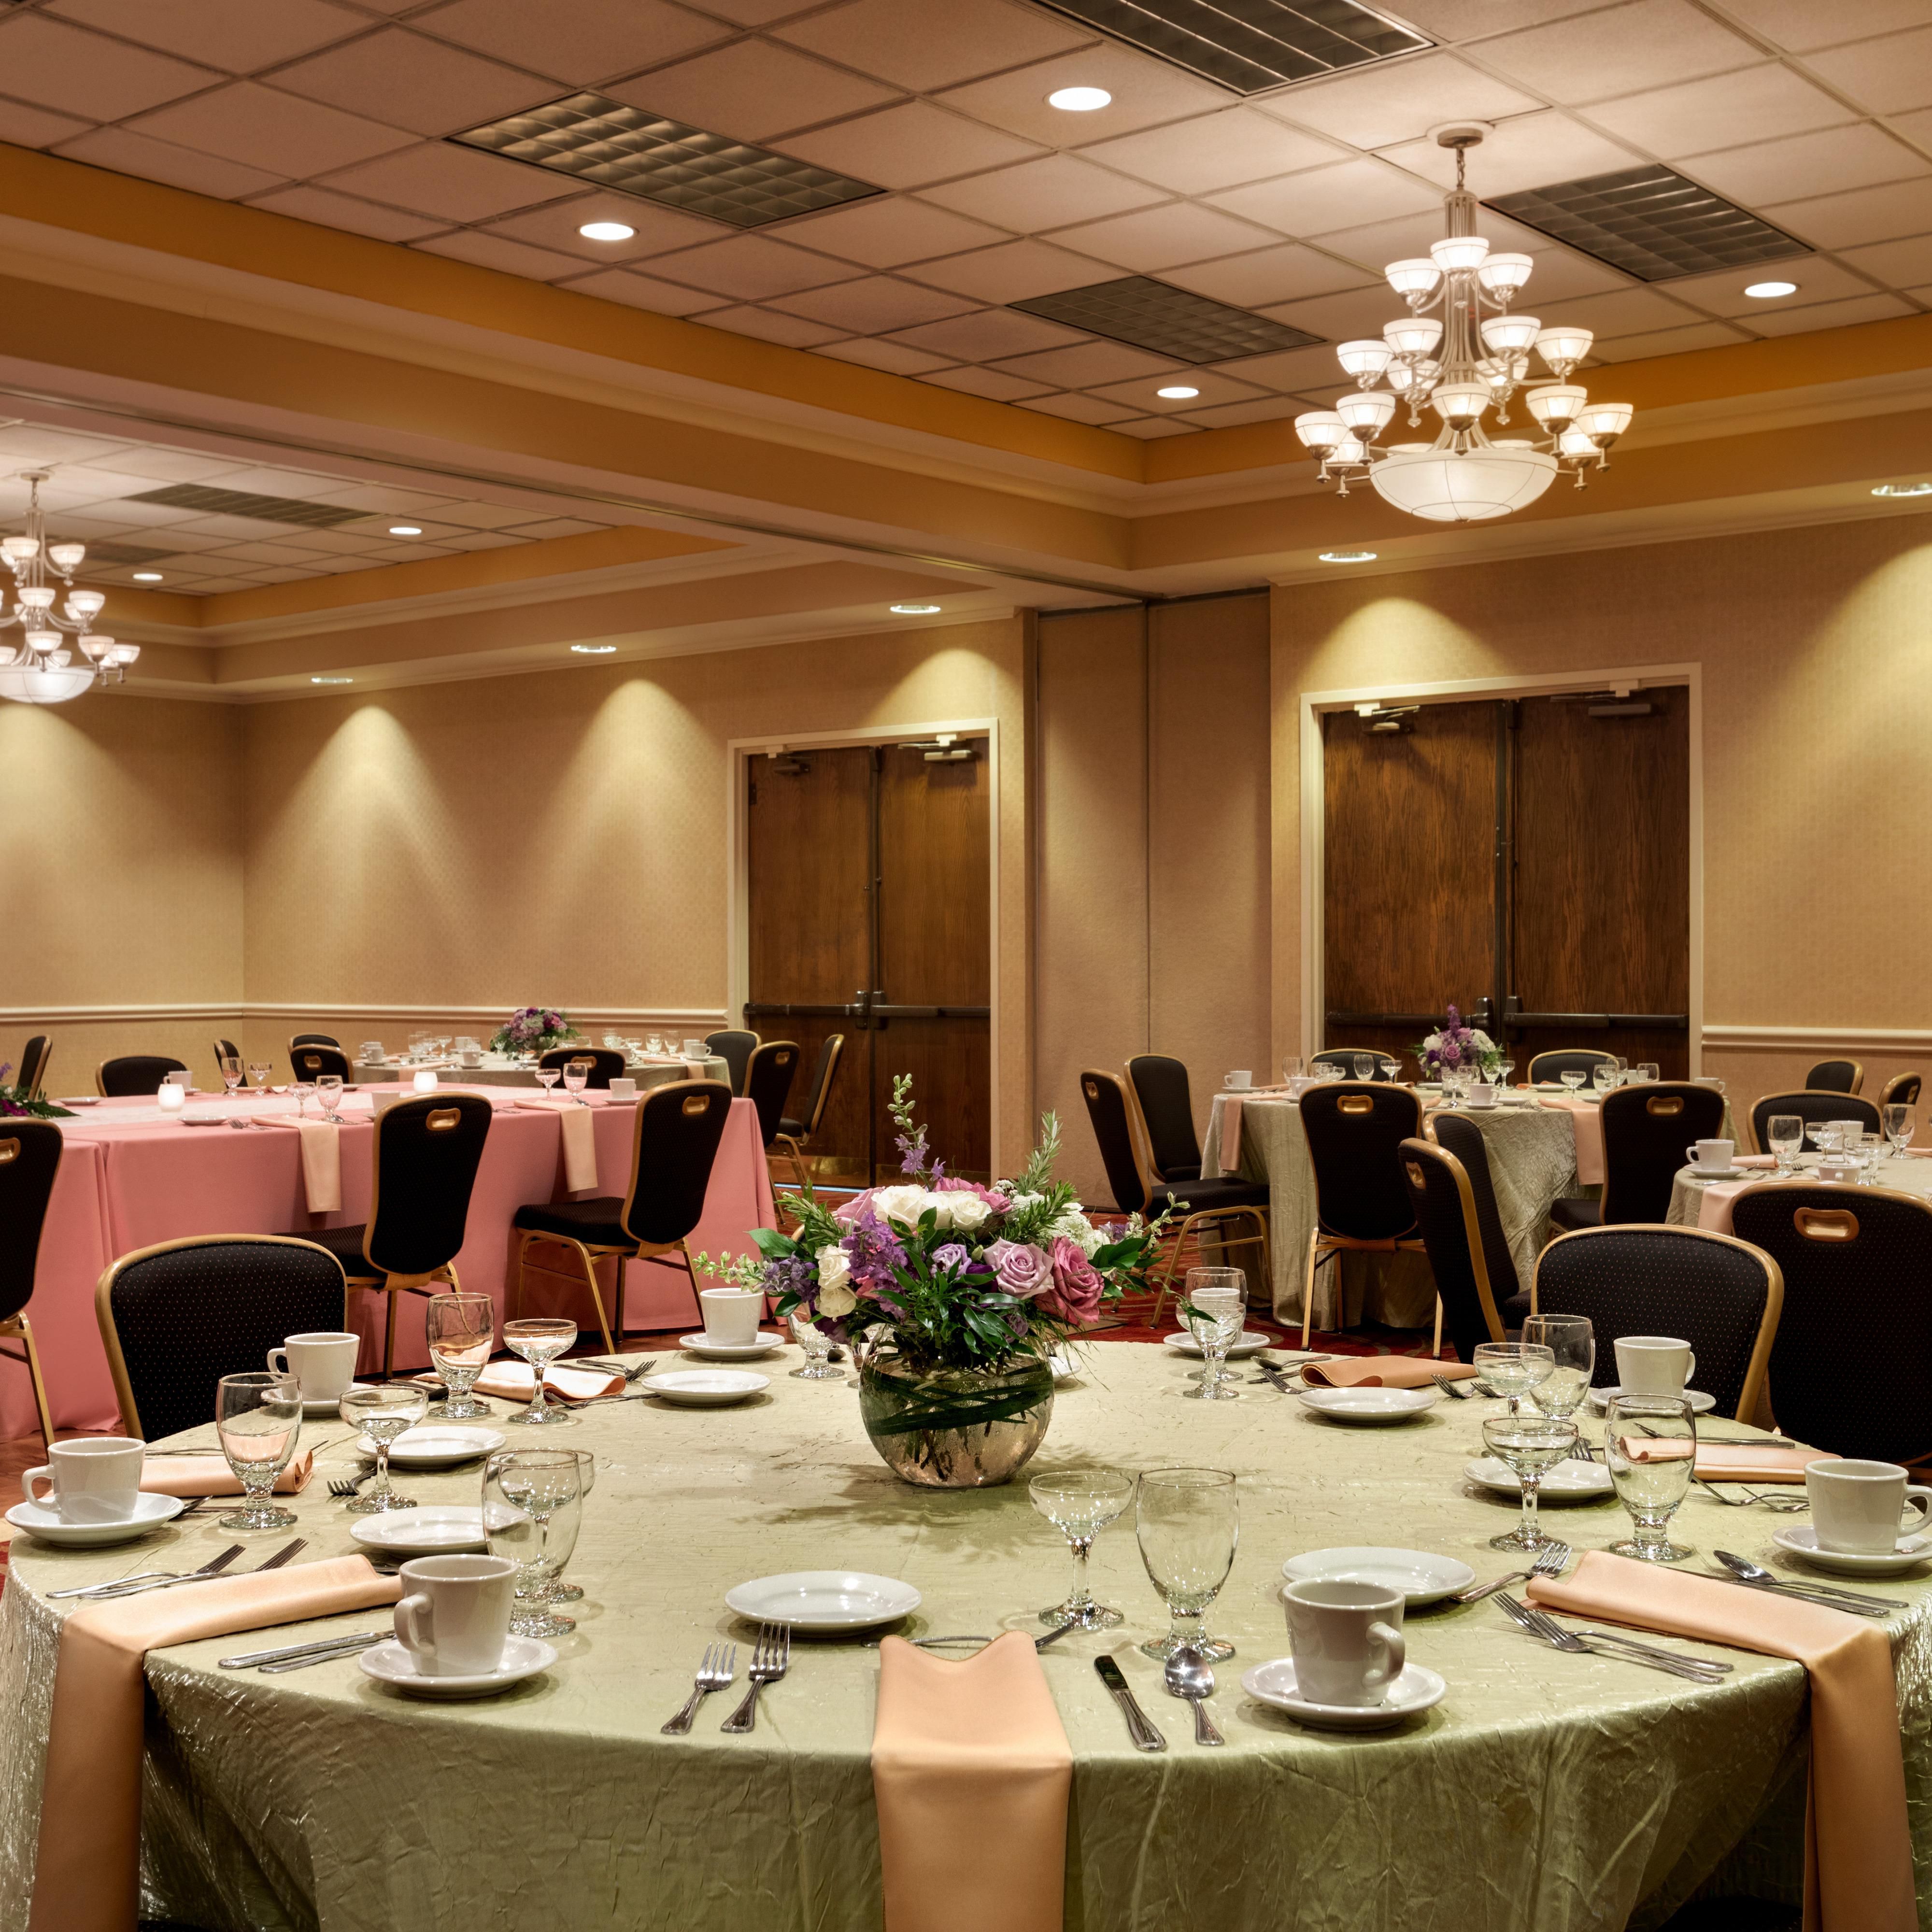 A refined space for intimate receptions and celebrations alike.